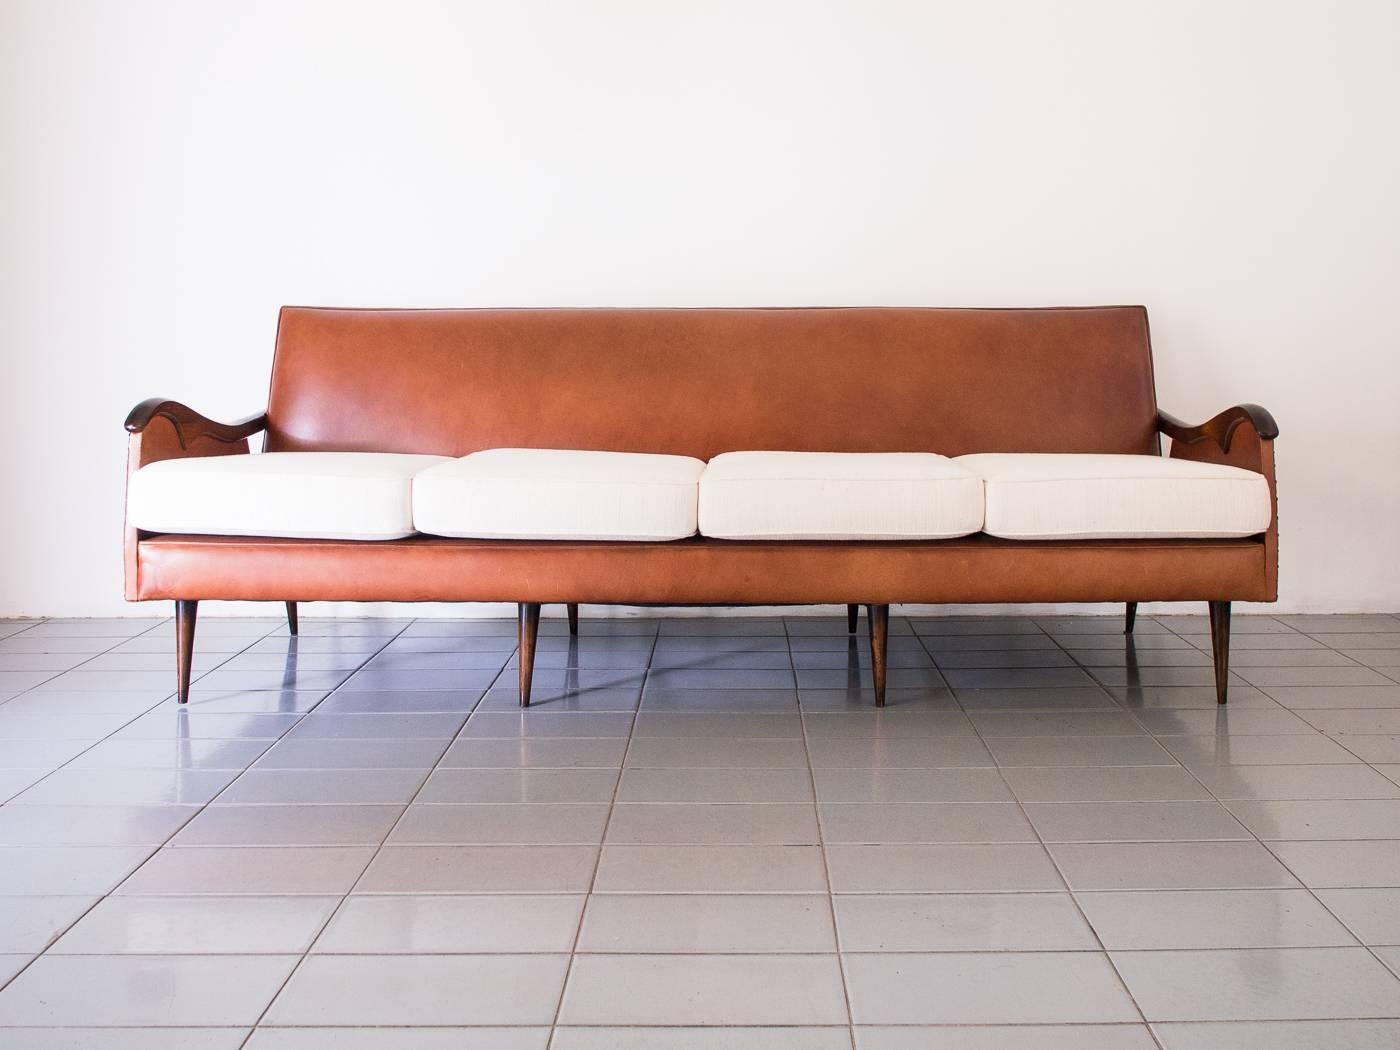 Big and classy four-seat sofa, with arms and legs in Brazilian rosewood, produced by Liceu de Artes e Ofícios, São Paulo, Brazil, 1950s. Beautiful rosewood piece runs through the whole back of the sofa.